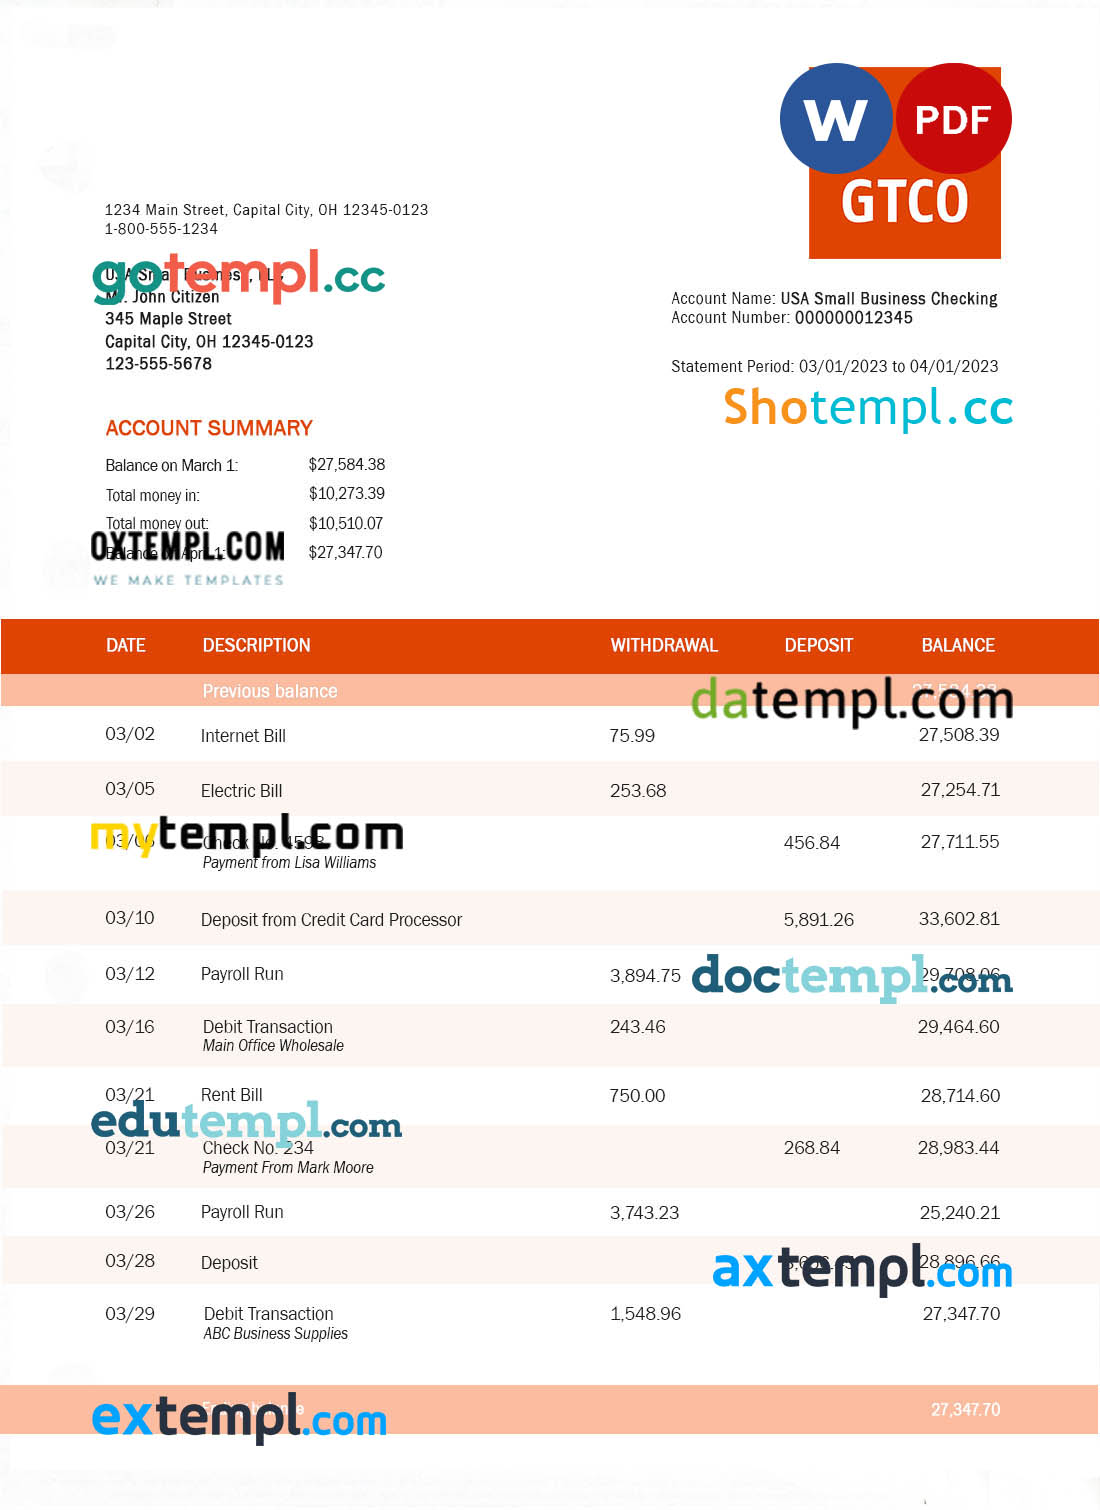 editable template, Gt Bank organization checking account statement Word and PDF template